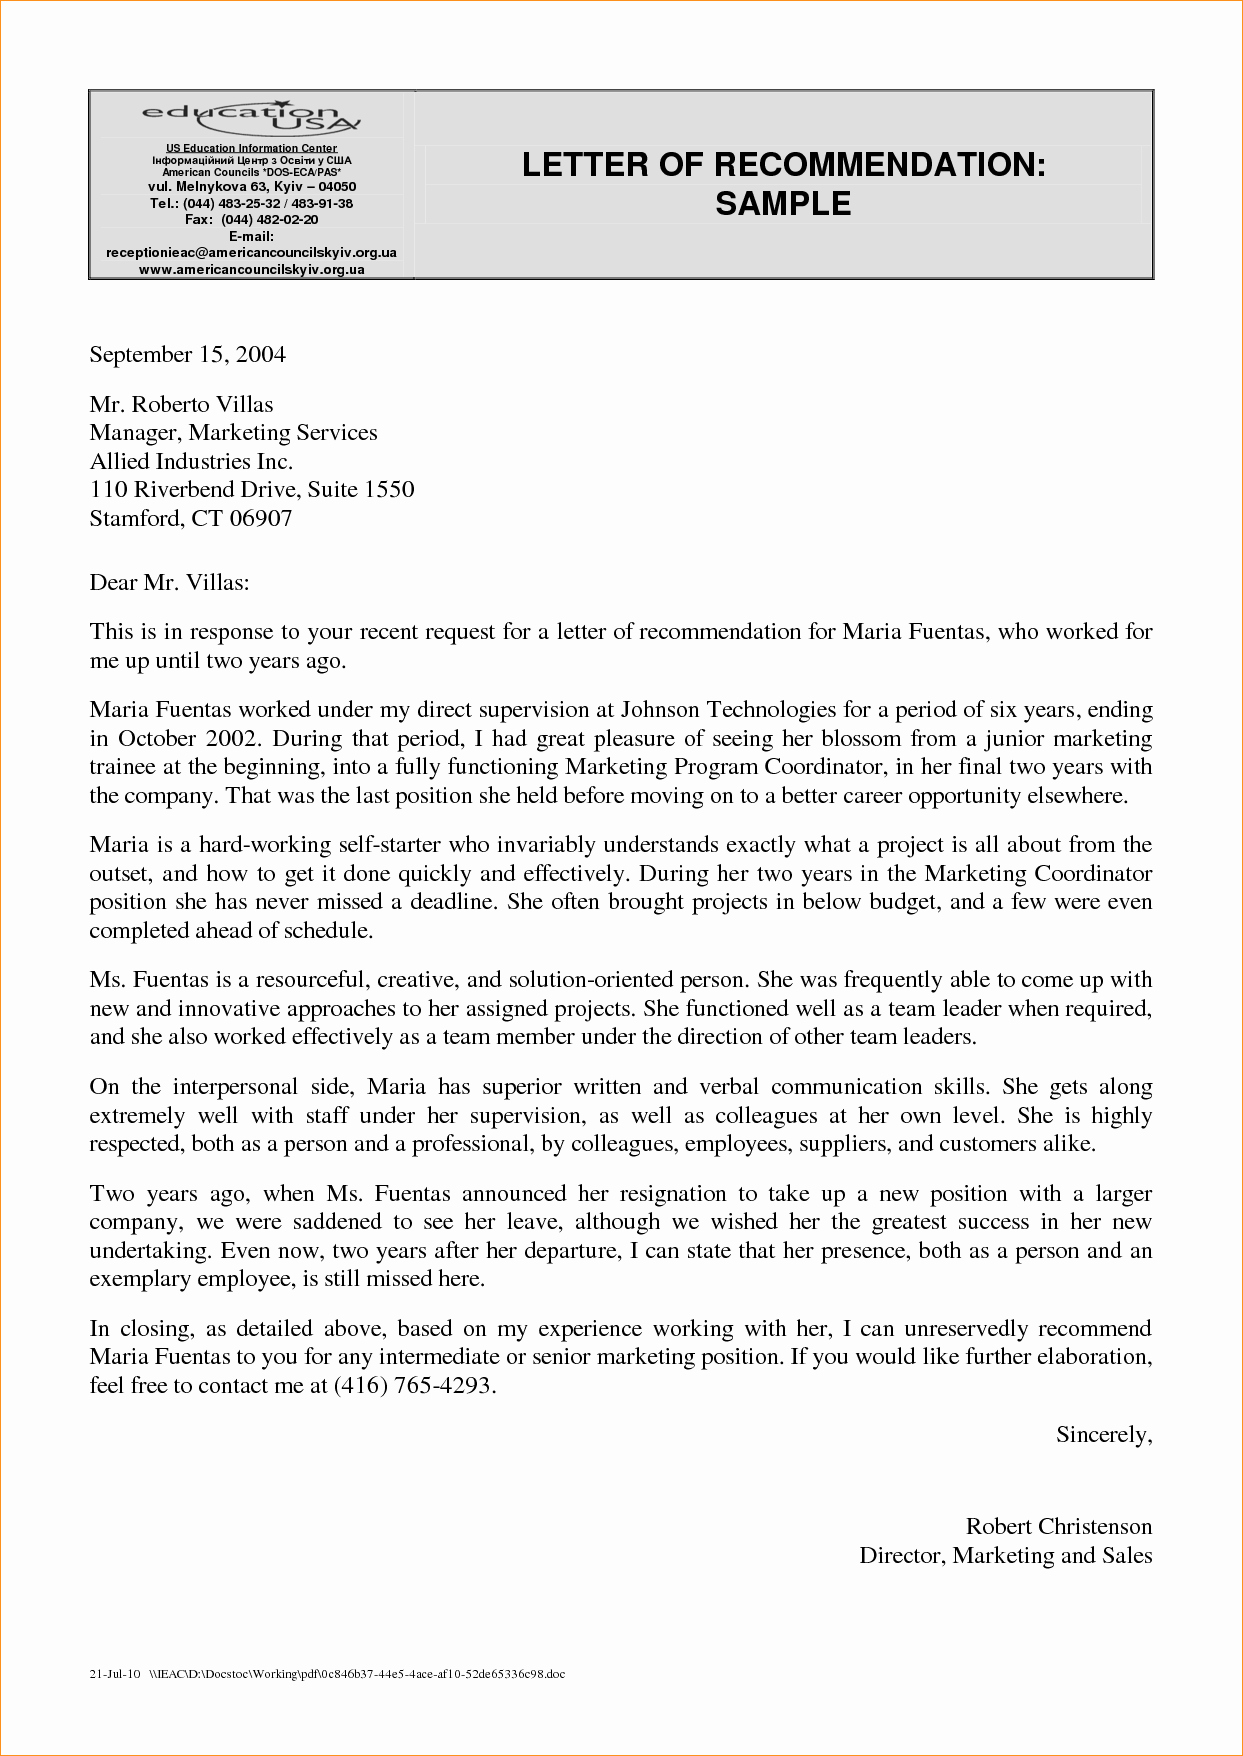 A Professional Letter Of Re Mendation Business